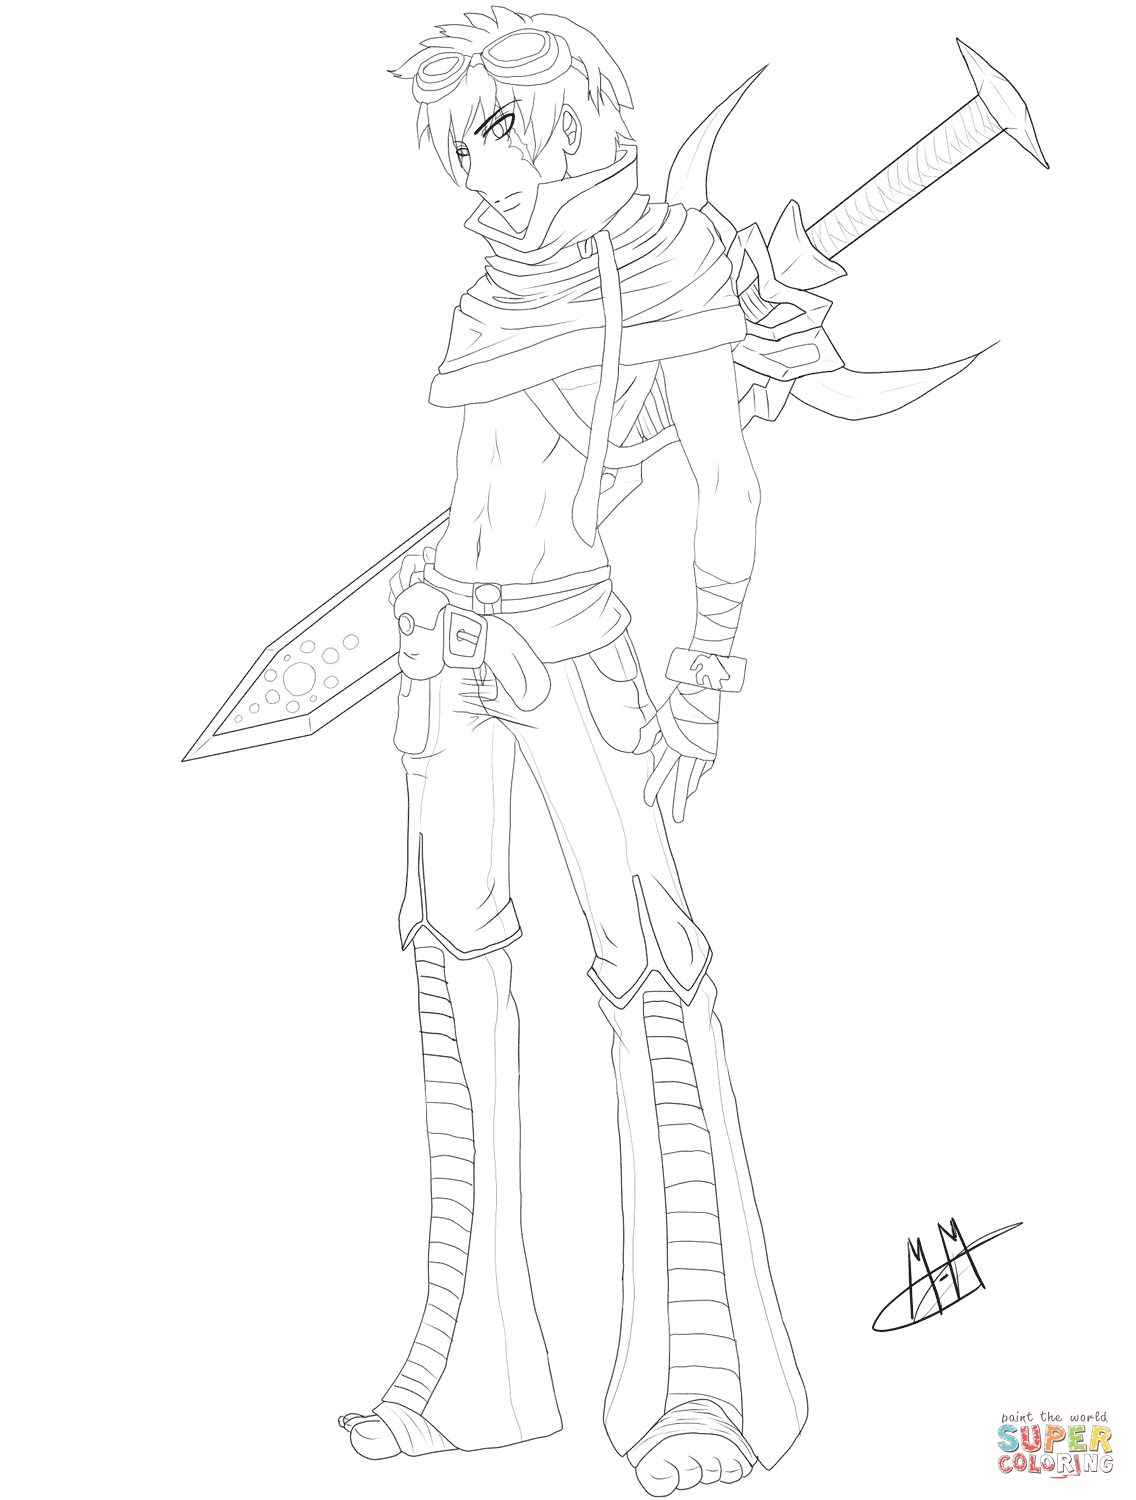 Gaia Anime Boy Character coloring page | Free Printable Coloring Pages